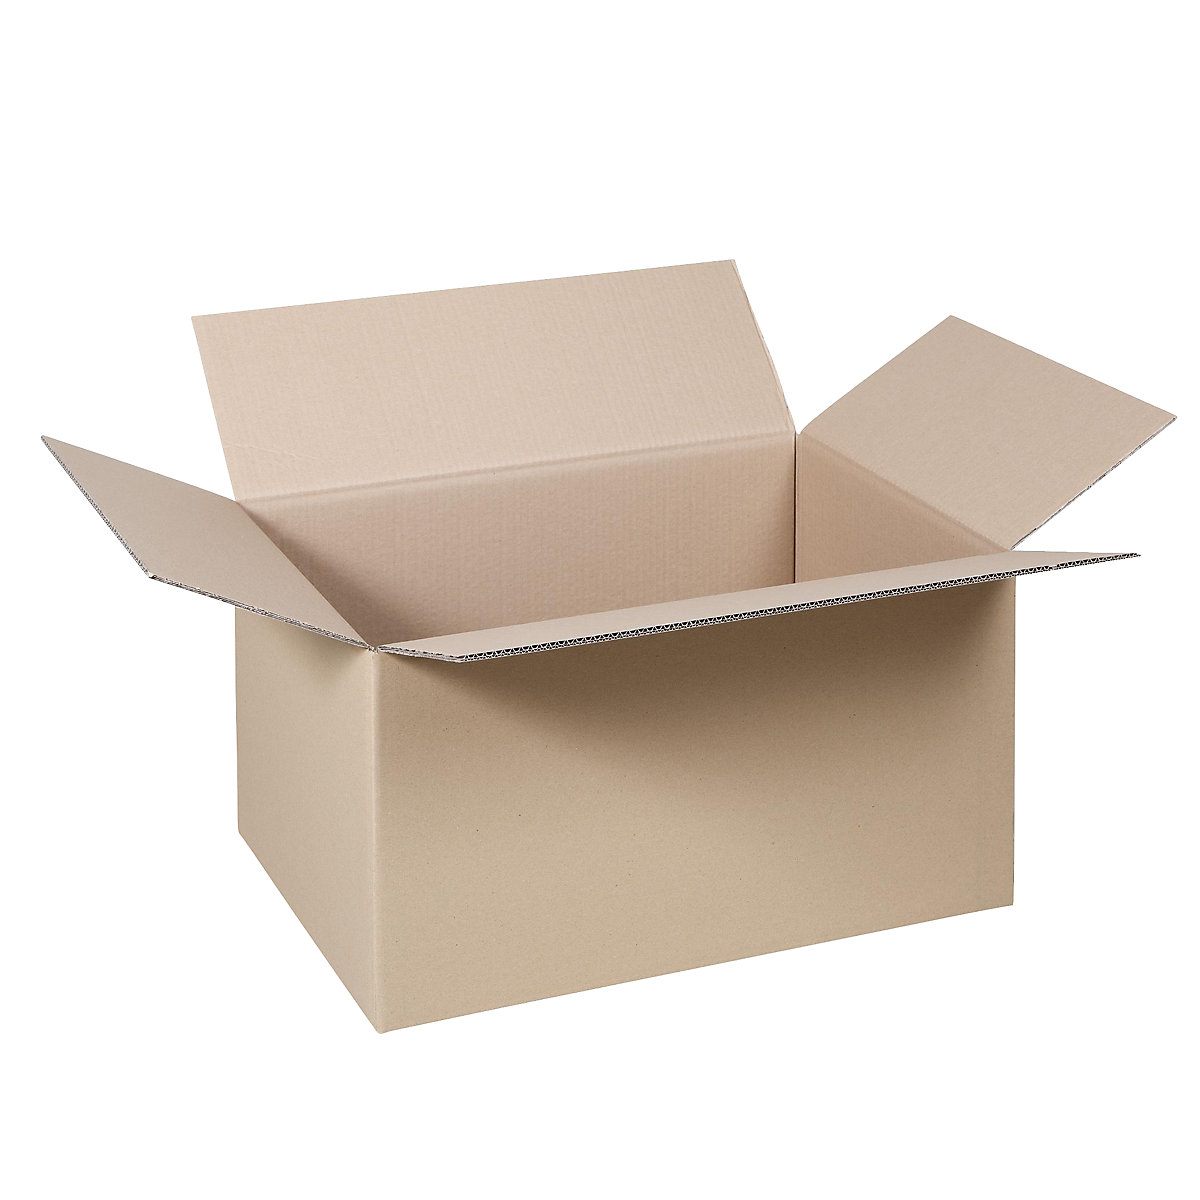 Folding cardboard box, FEFCO 0201, made of double fluted cardboard, internal dimensions 410 x 320 x 240 mm, pack of 100-43